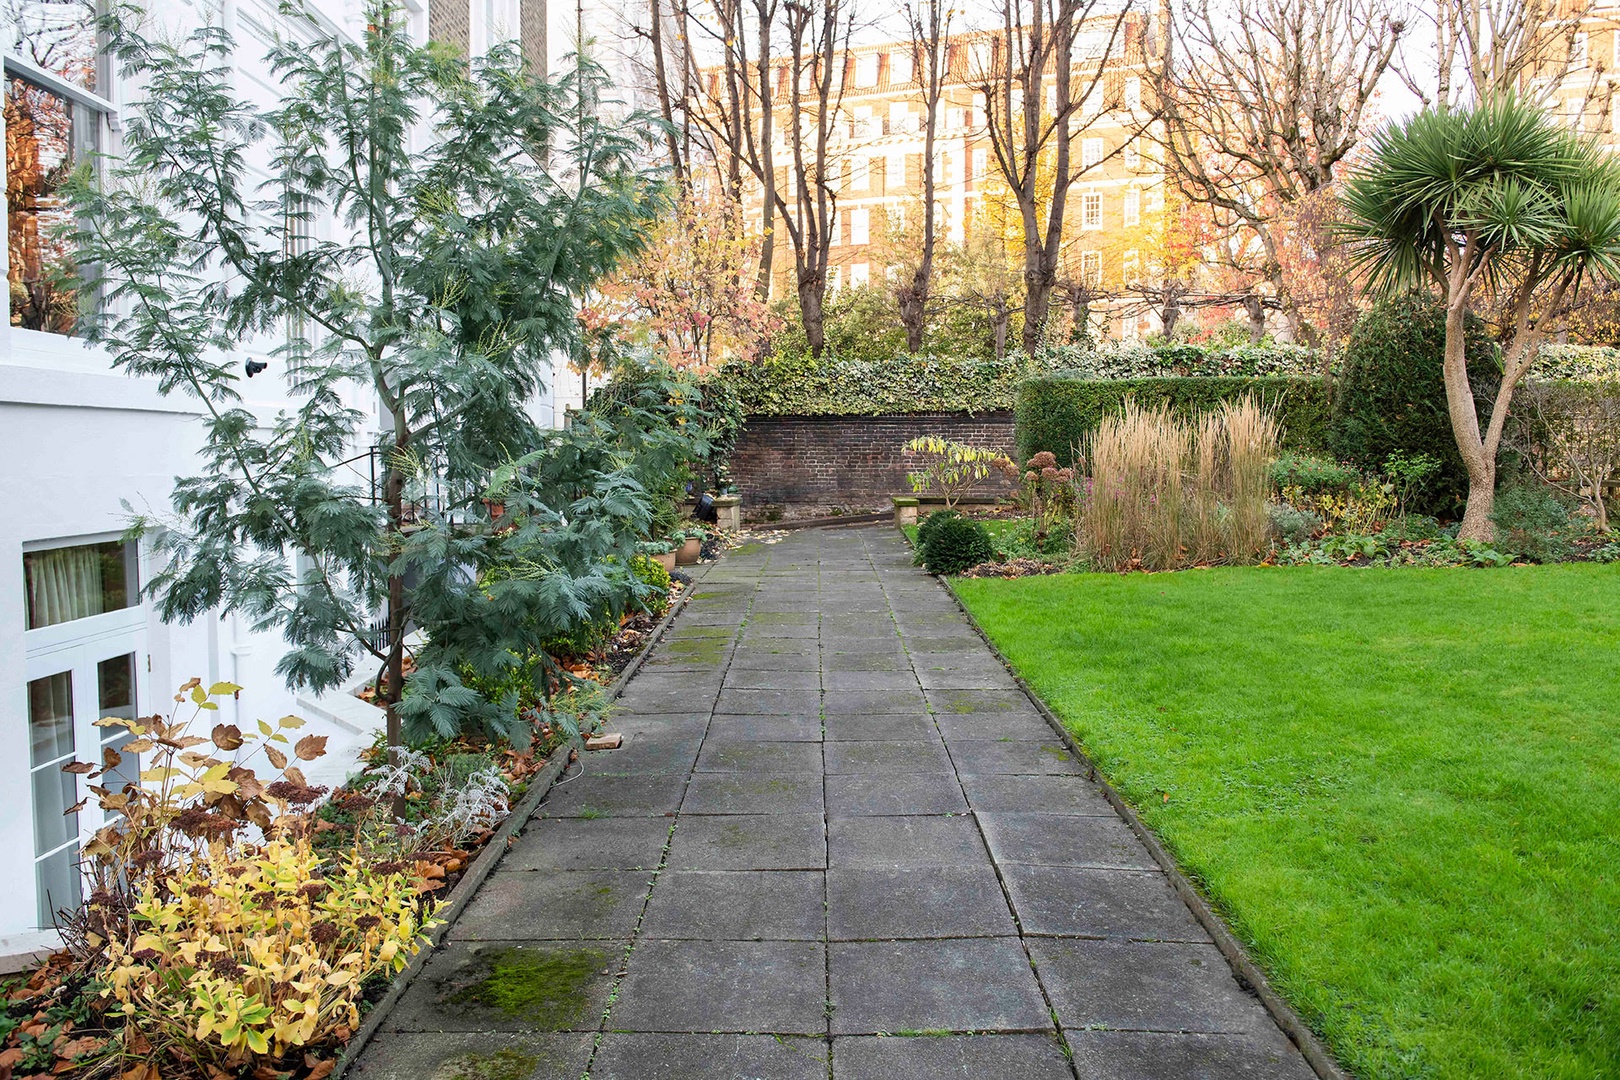 Private communal garden is a rare find in London.